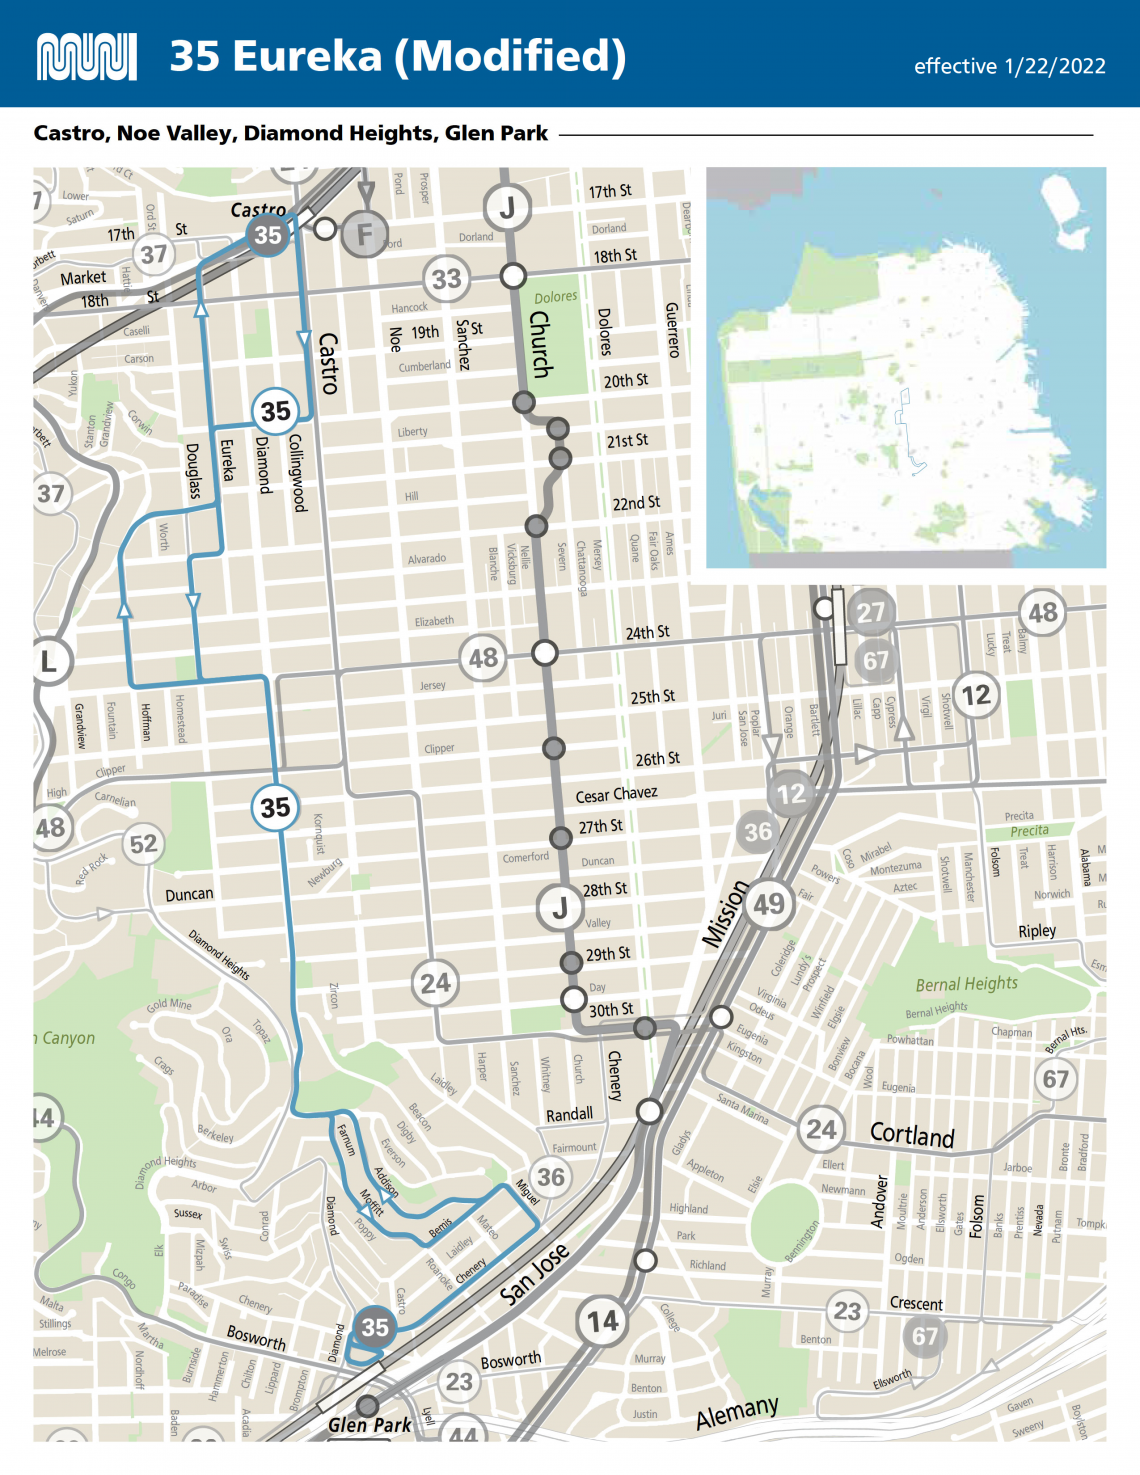 Route Map for the 35 Eureka